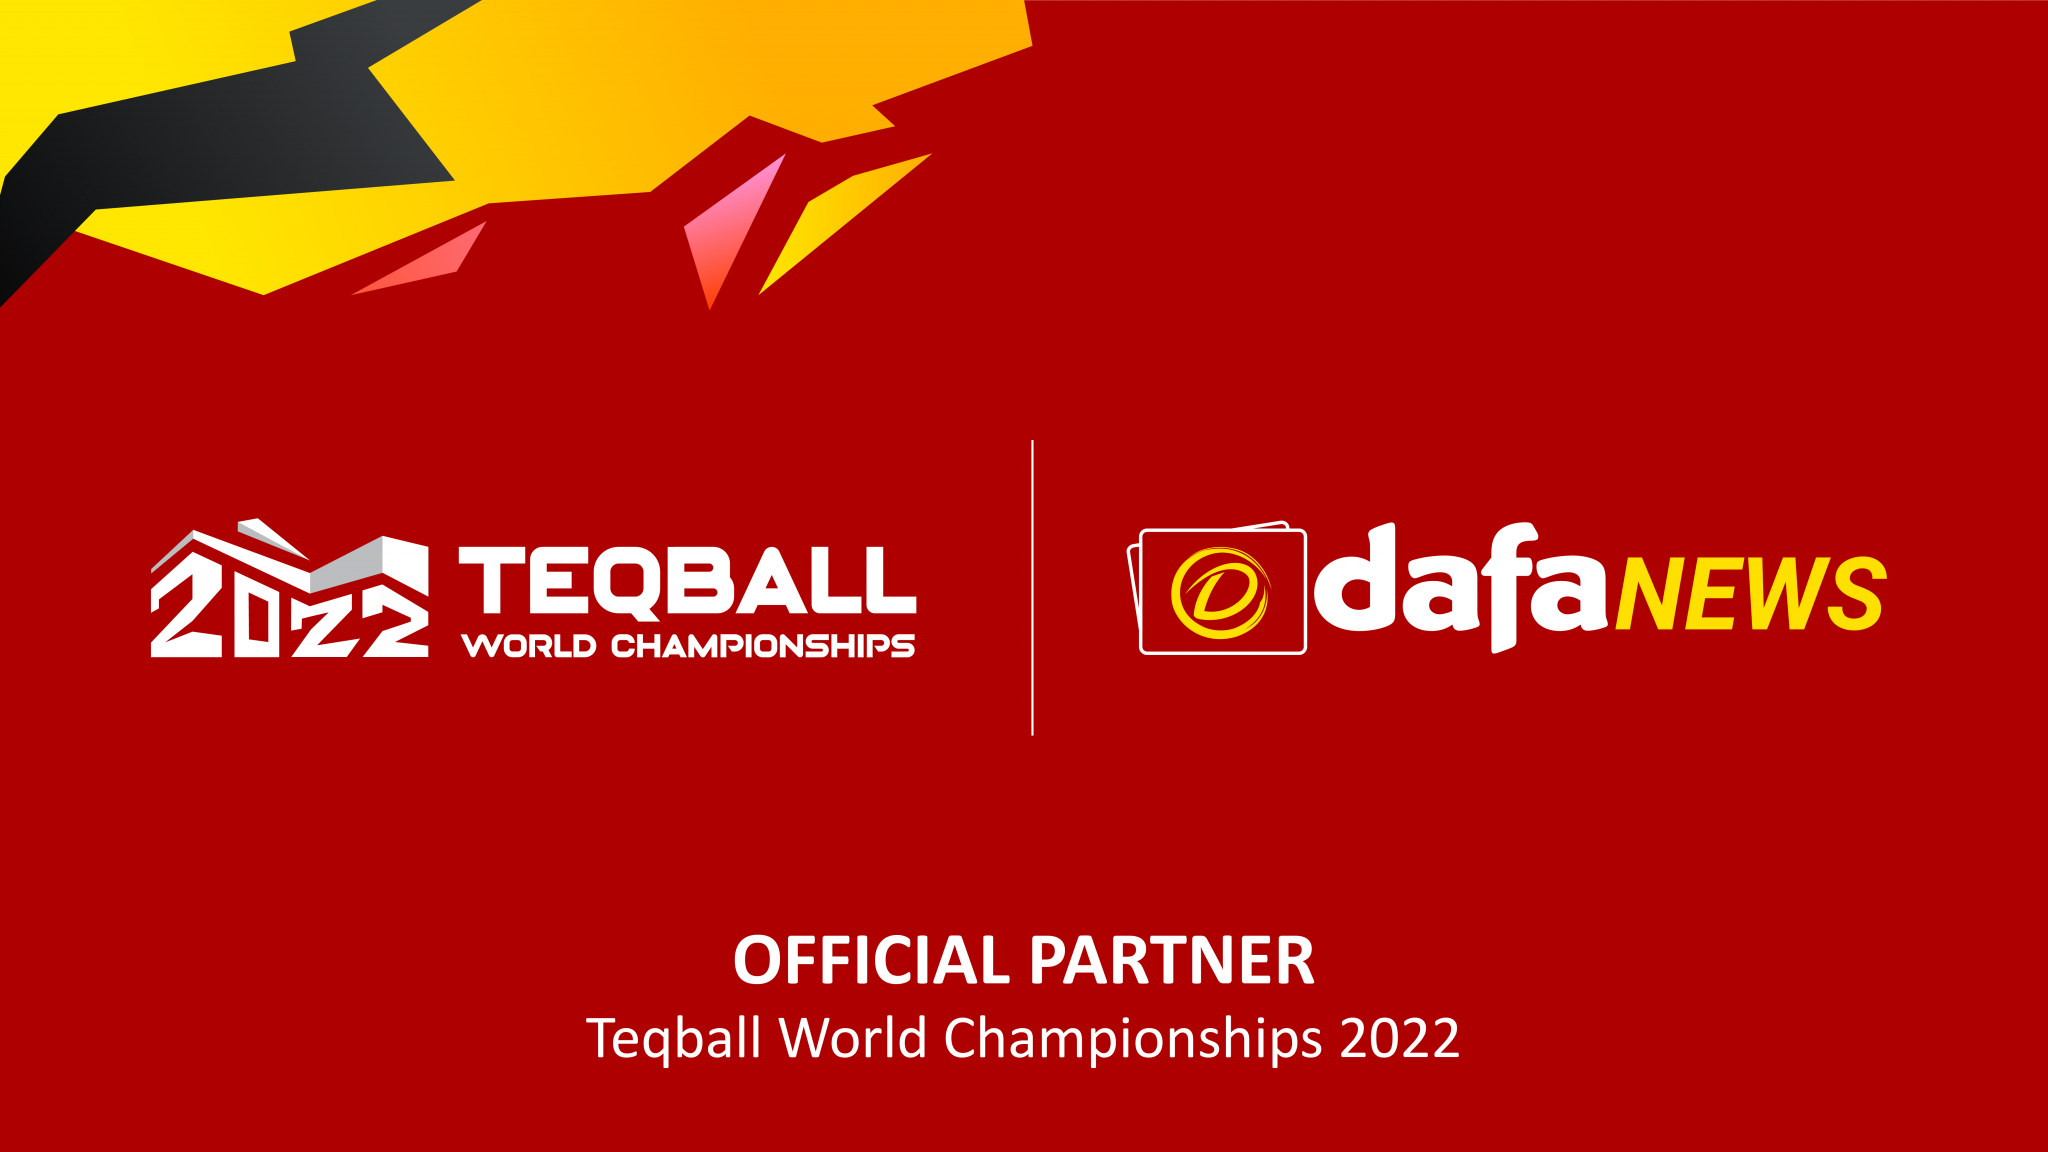 DafaNews announced as official partner for Teqball World Championships